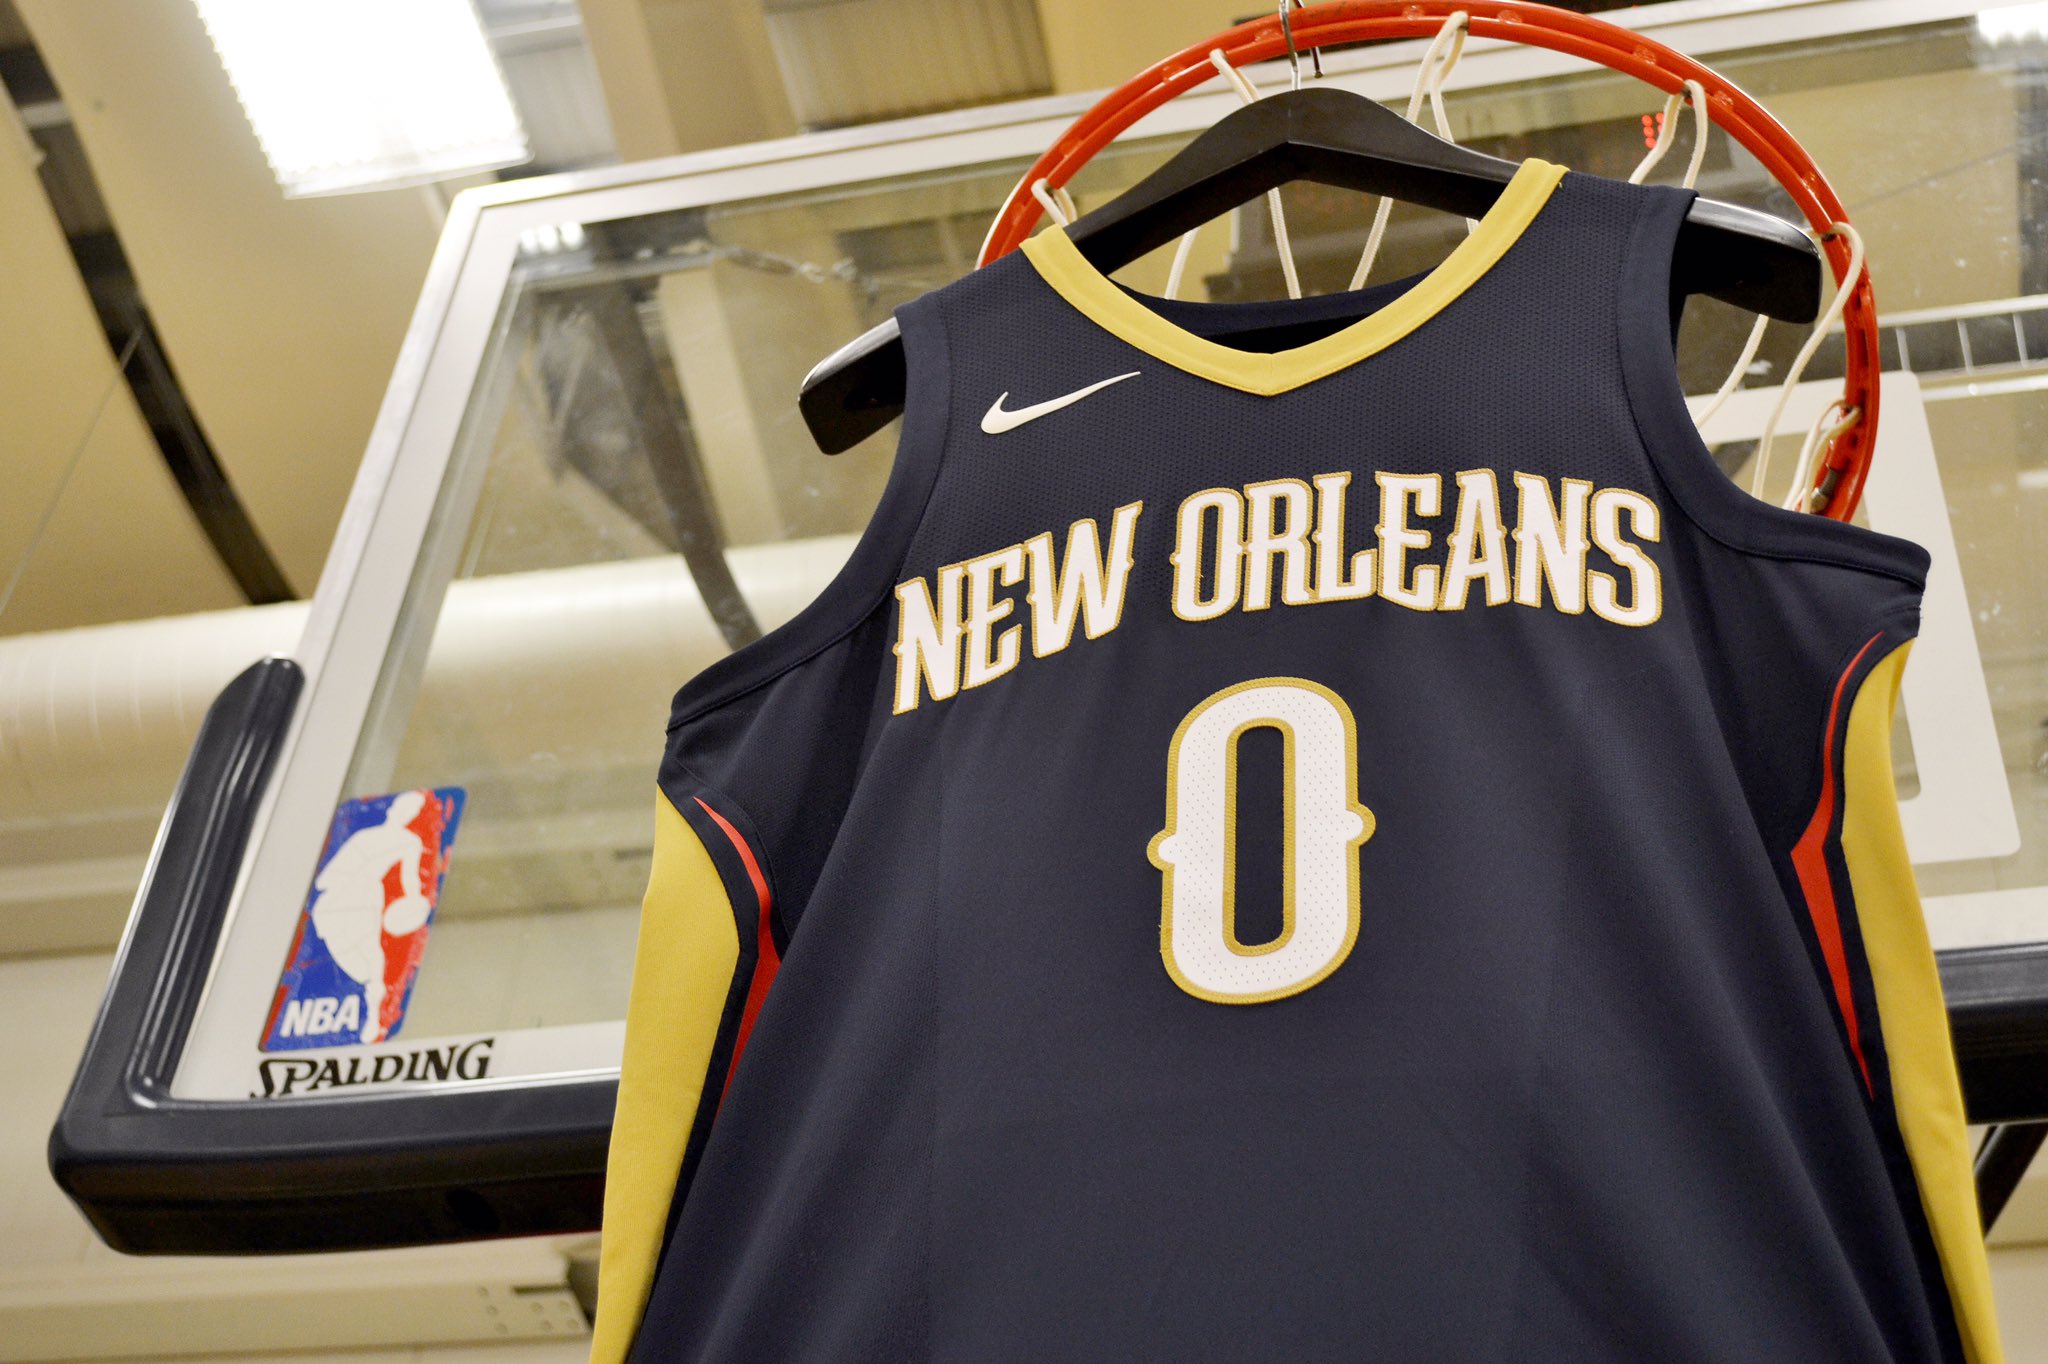 New Orleans Pelicans on Twitter: "This is BIG: @Nike threads coming to New Orleans! #NOLA ⚜️ https://t.co/7boDbQUvt1" / Twitter